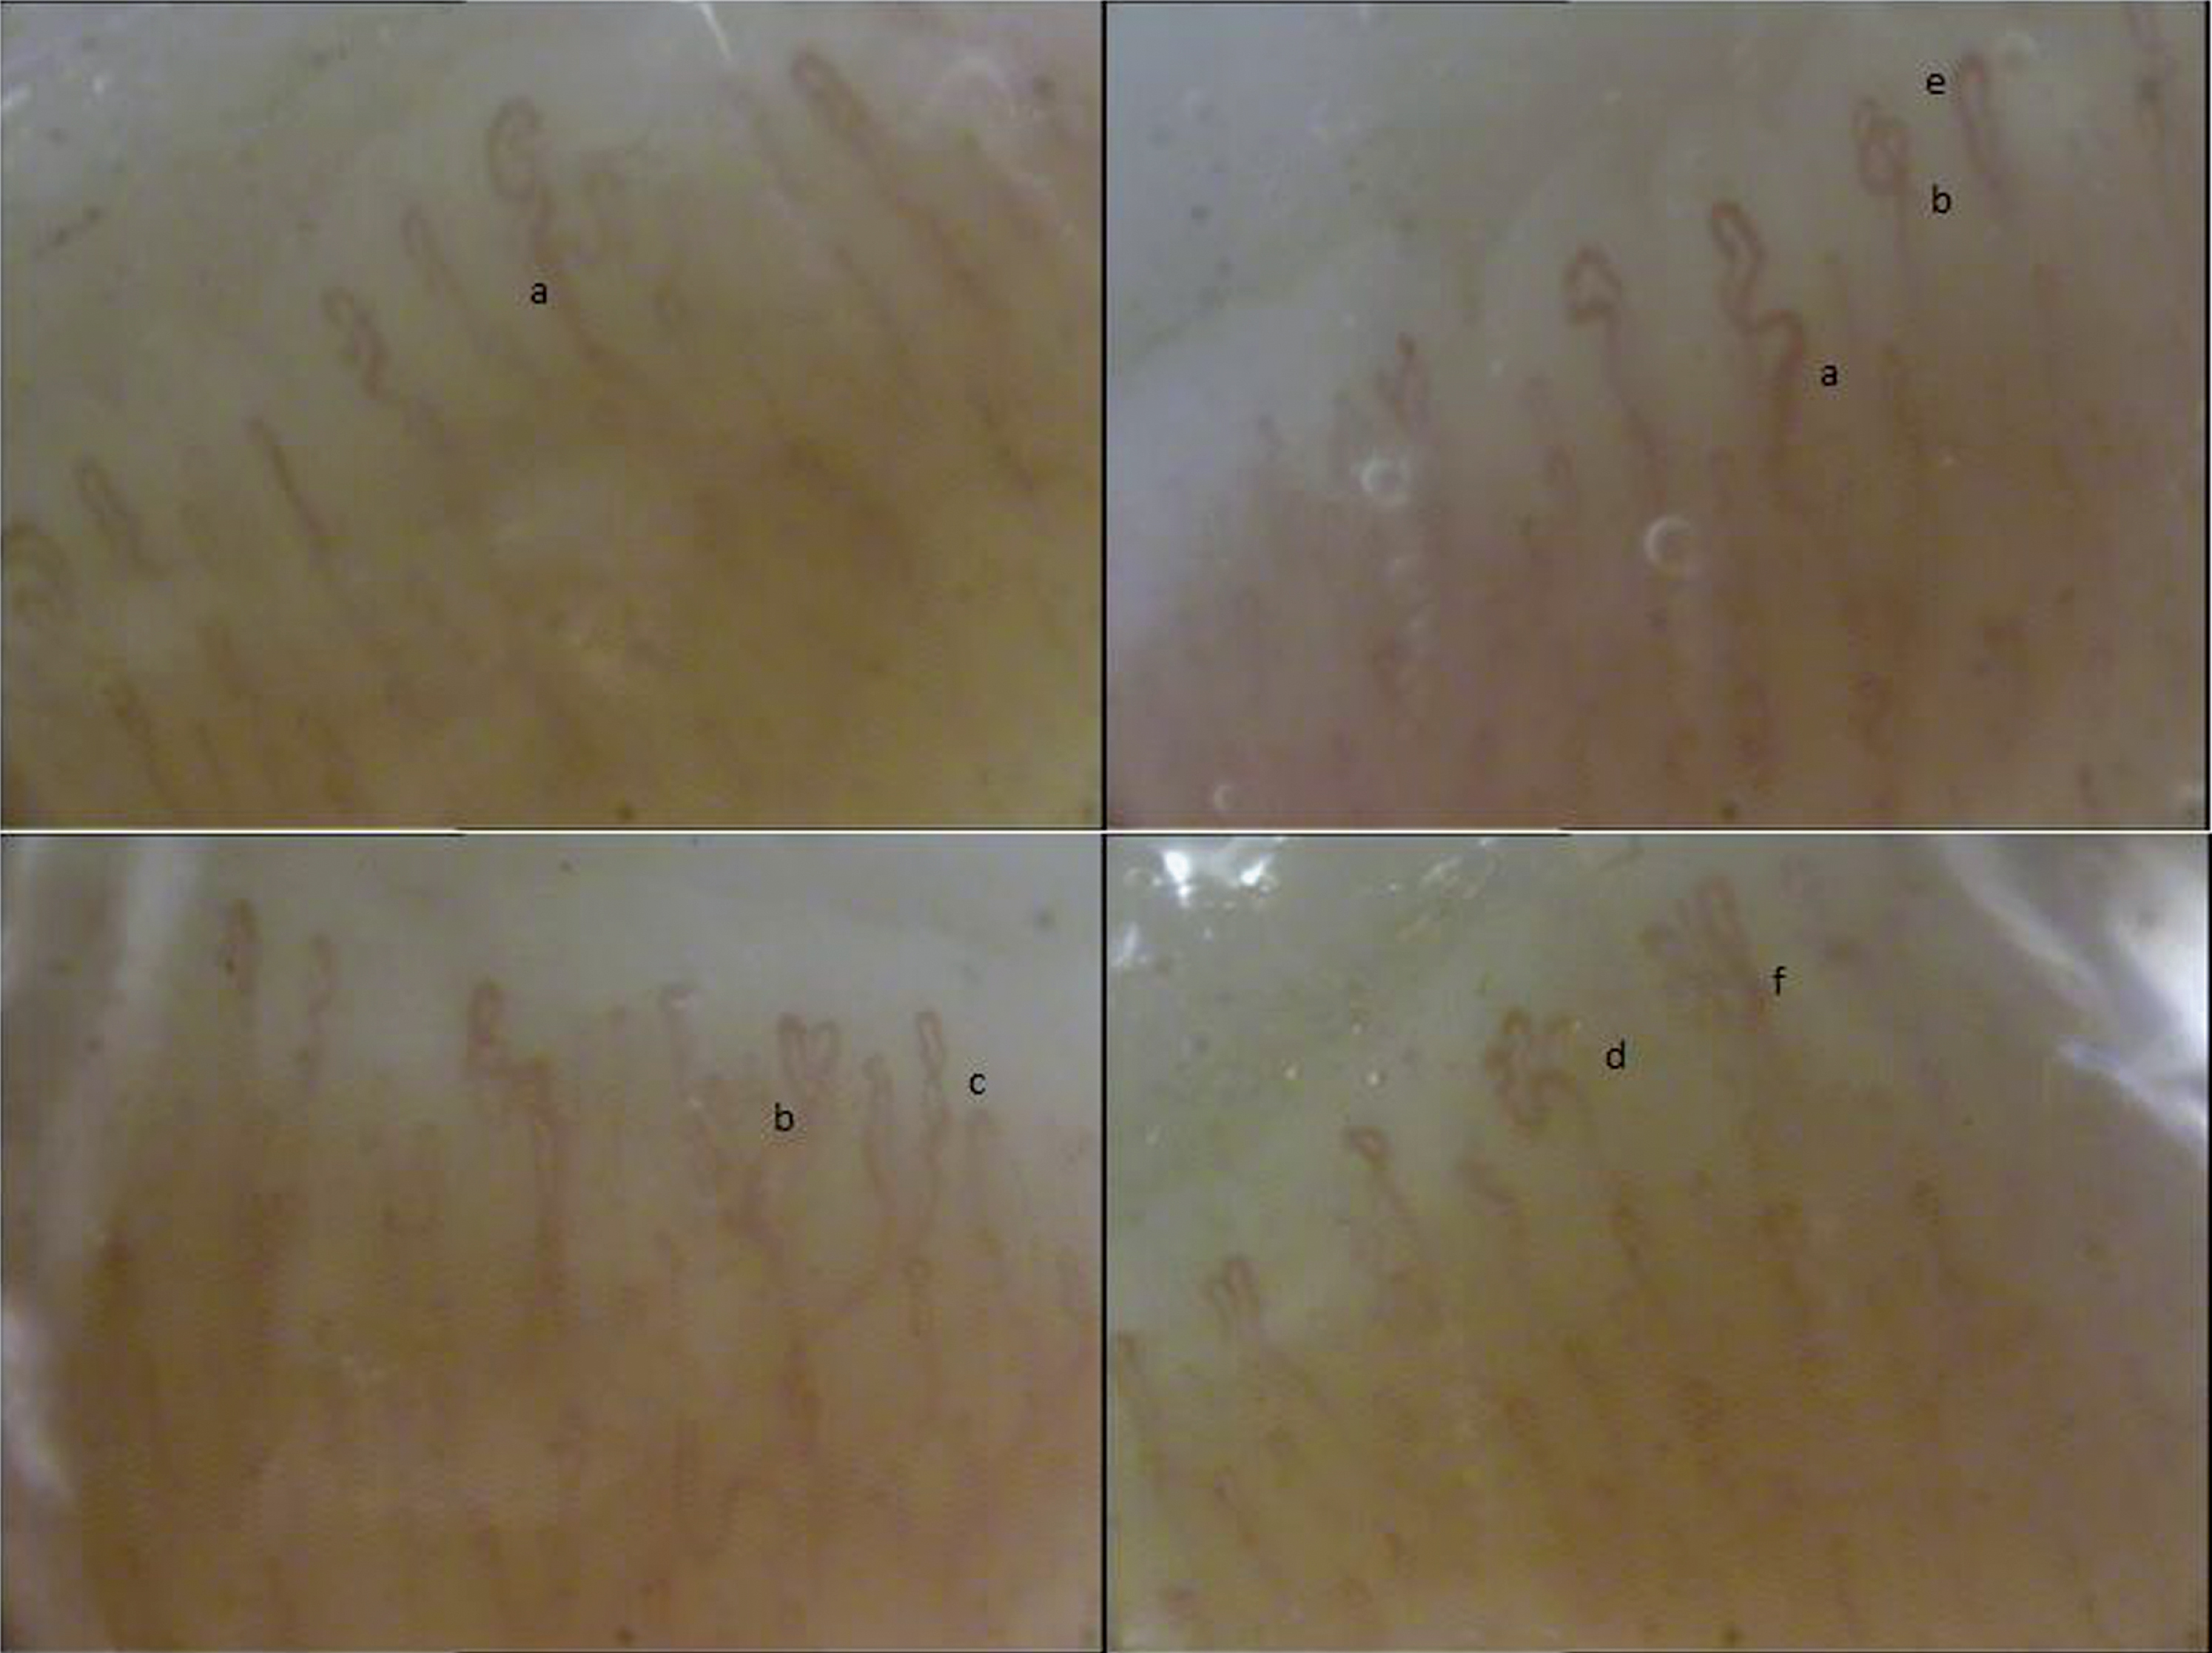 Nailfold videocapillaroscopy images in a case of volleyball player showing a “non-specific pattern”: a) ectasia of the efferent tract of the loops, b) apical ecatsia, c) tortuosity and newly formed capillaries with d1) bushy, d2) branching, d3) “candelabrum” appearance.